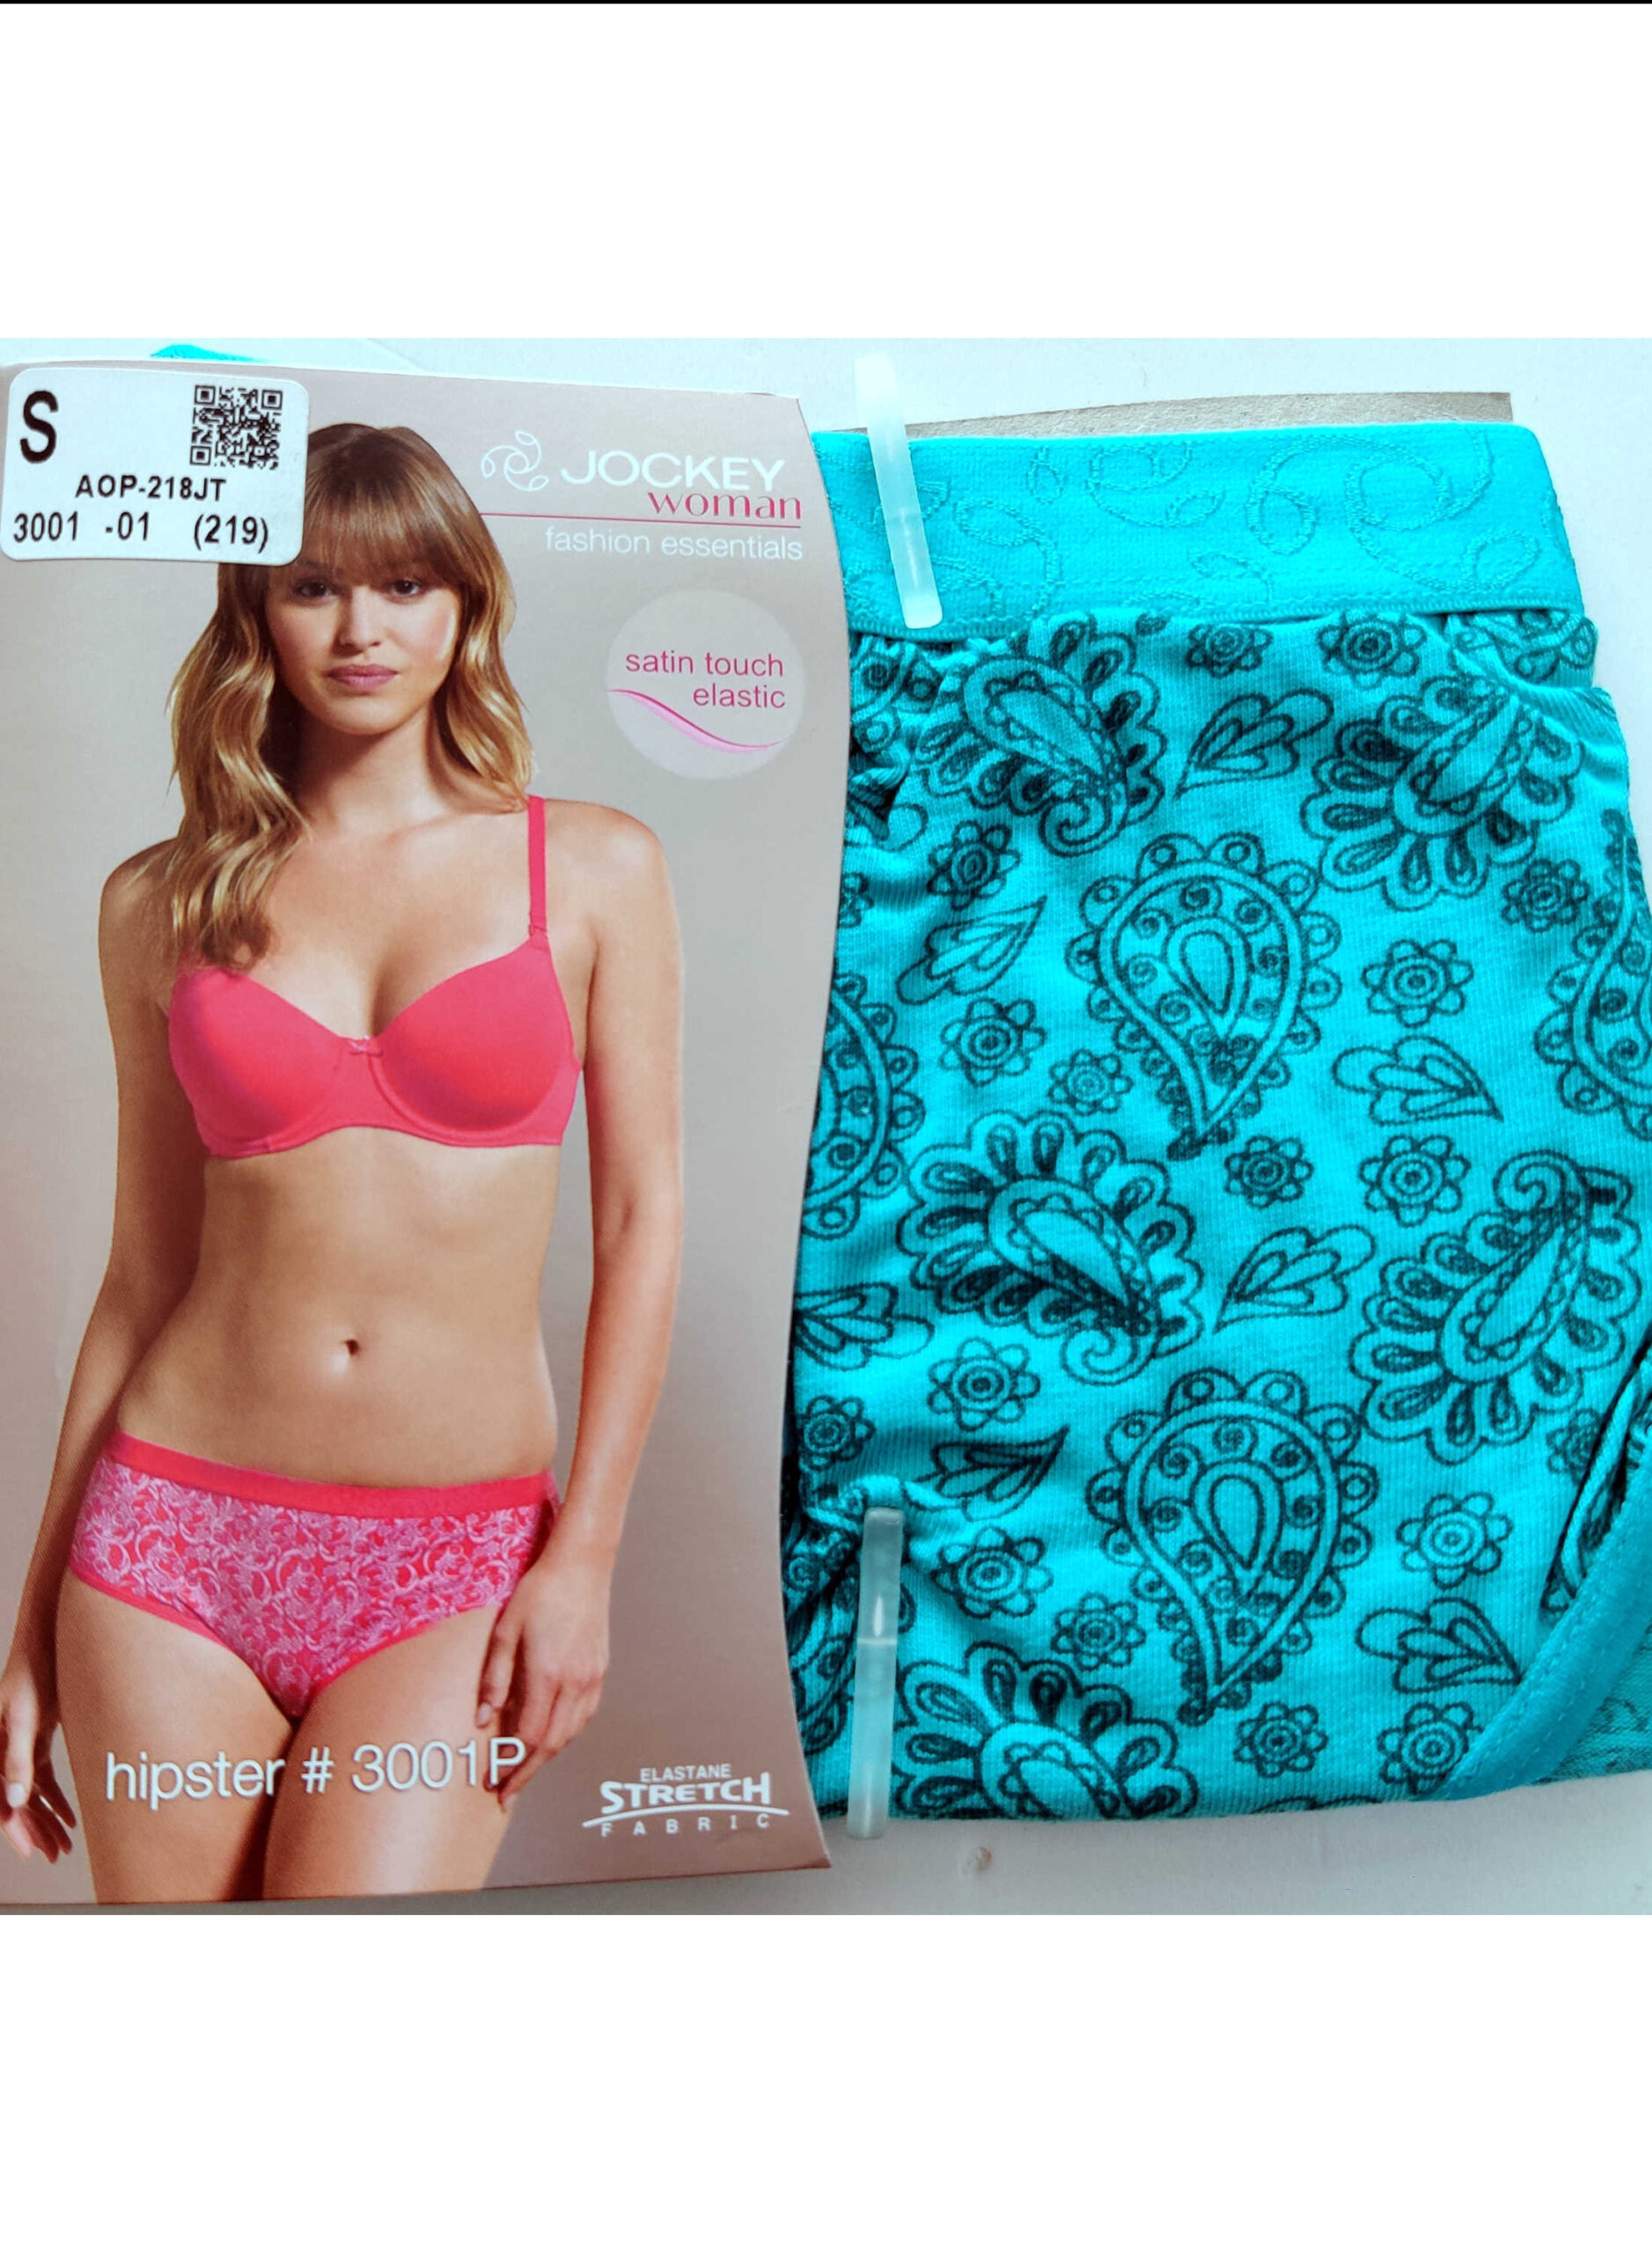 Jockey Girl's Super Combed Cotton Printed Panty with Ultrasoft